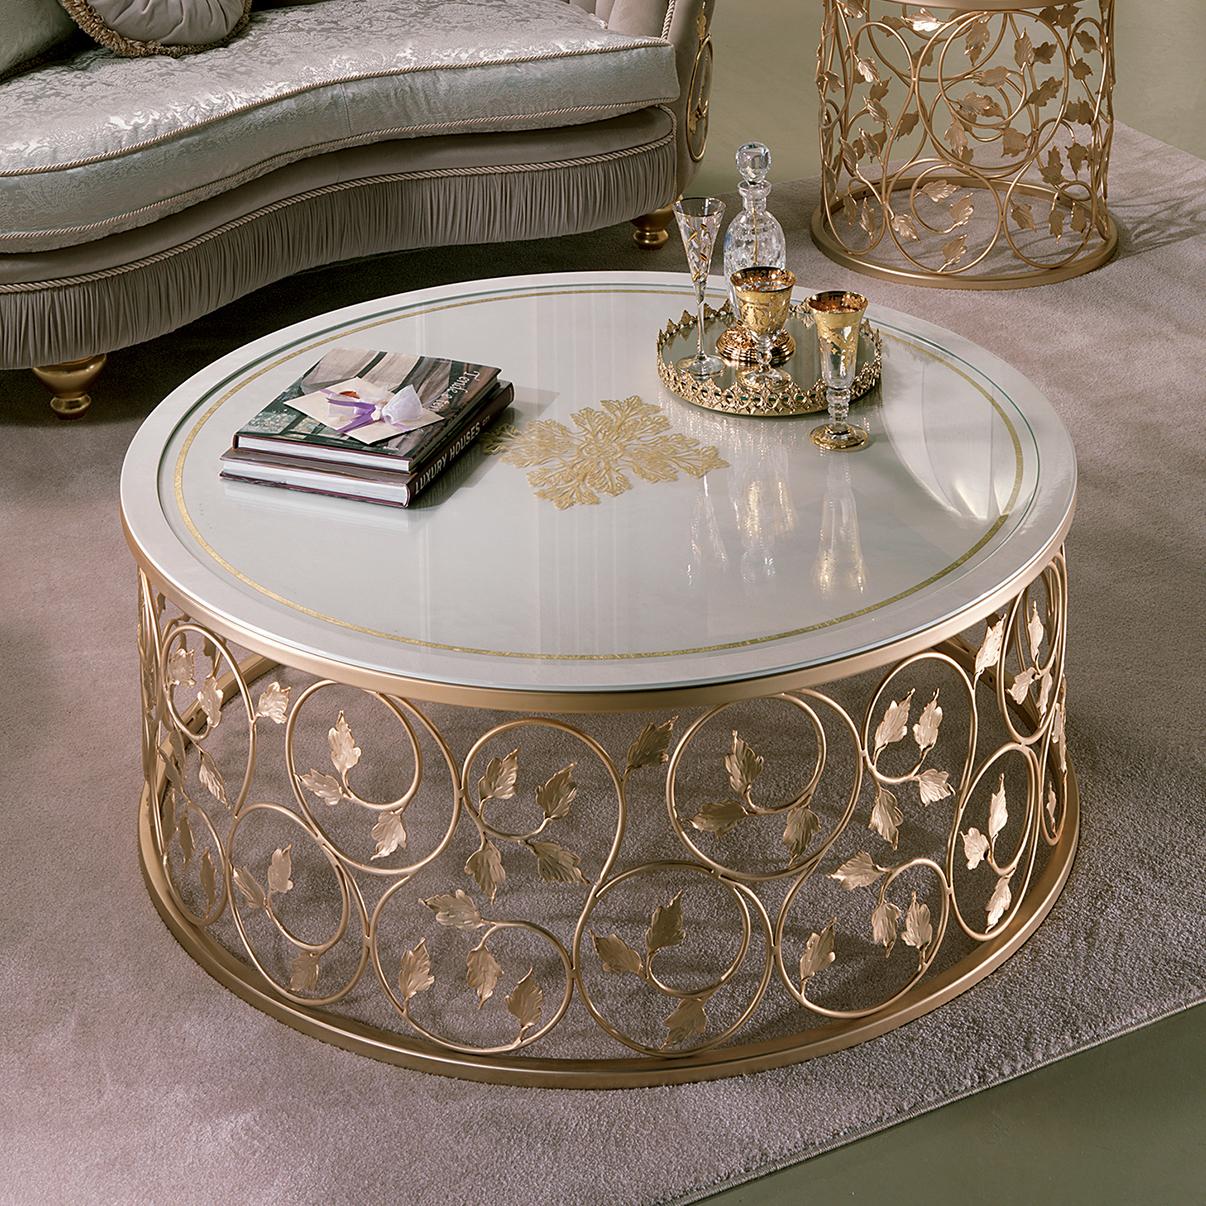 We enthusiastically introduce our AQ035 center table, enhanced by a wrought-iron base with hand-formed leaves and later galvanized in 24-karat gold. This piece of furniture represents a perfect blend of classic elegance and contemporary